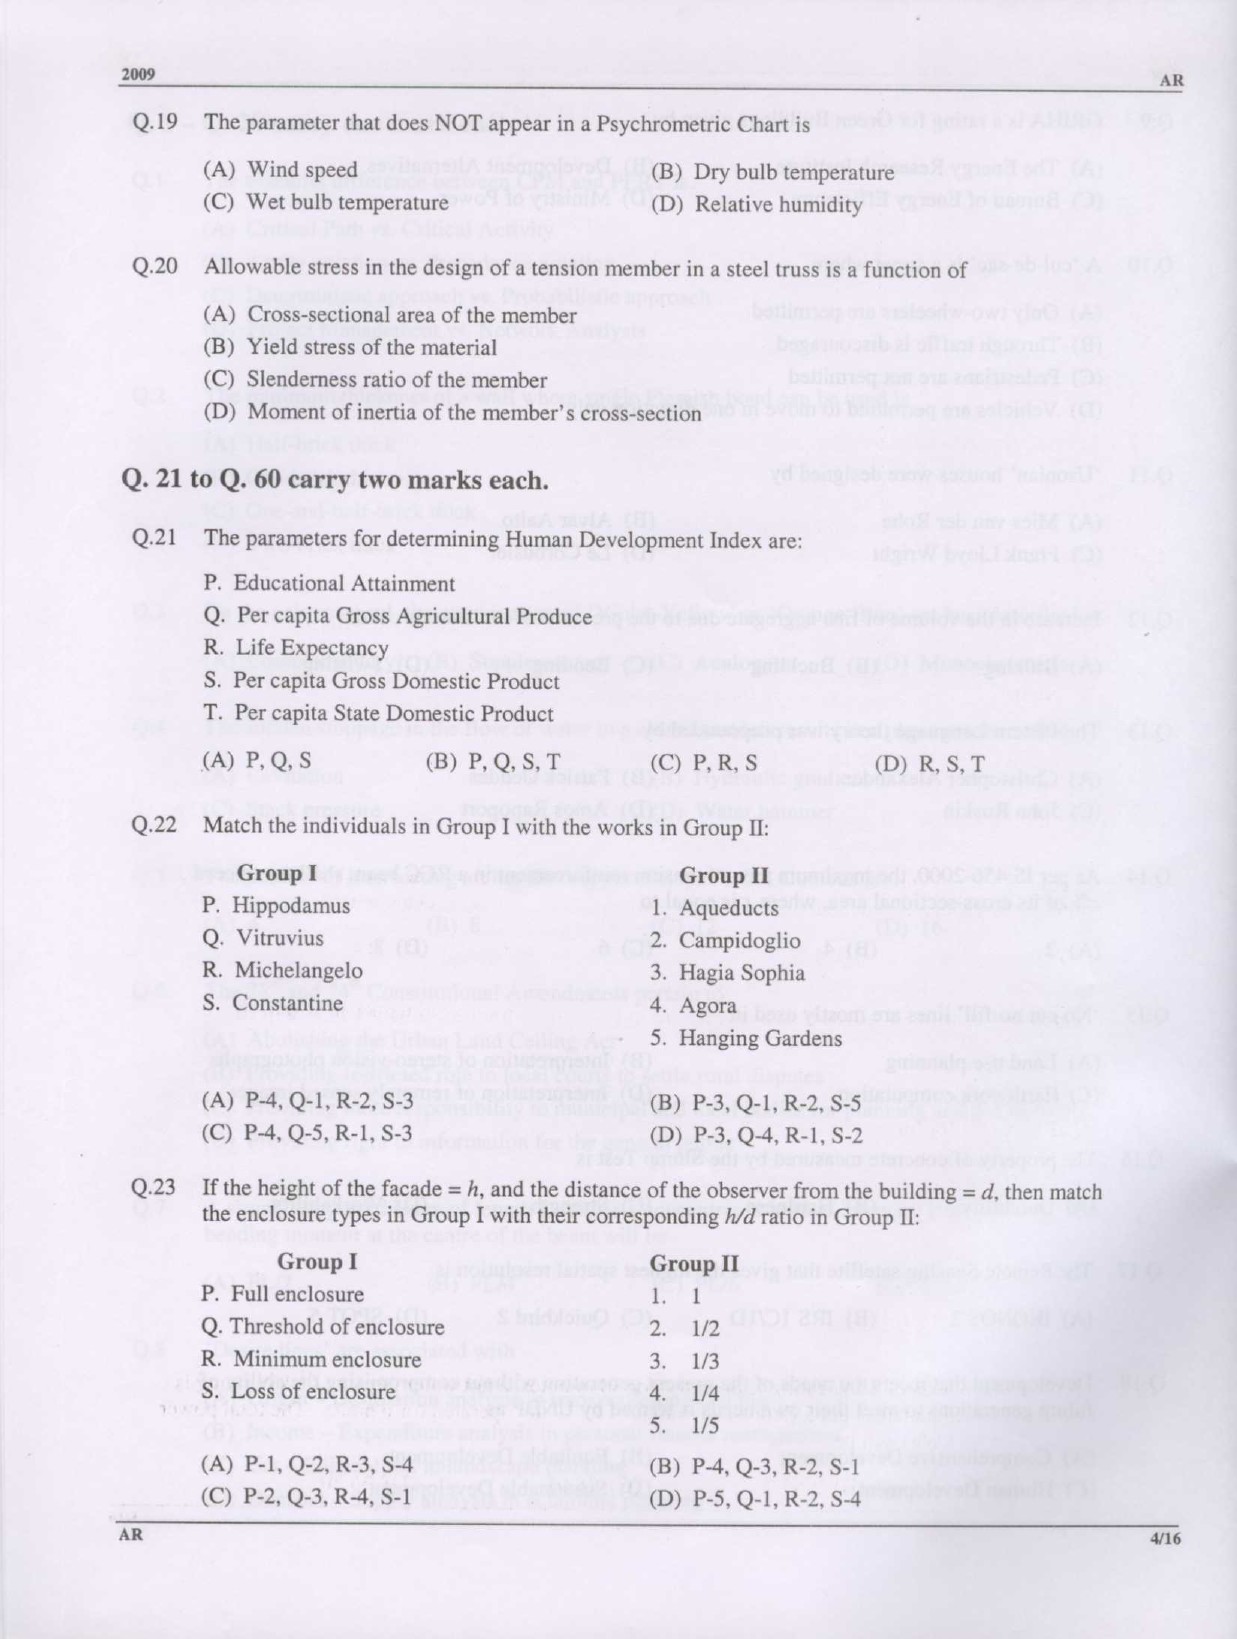 GATE Exam Question Paper 2009 Architecture and Planning 4